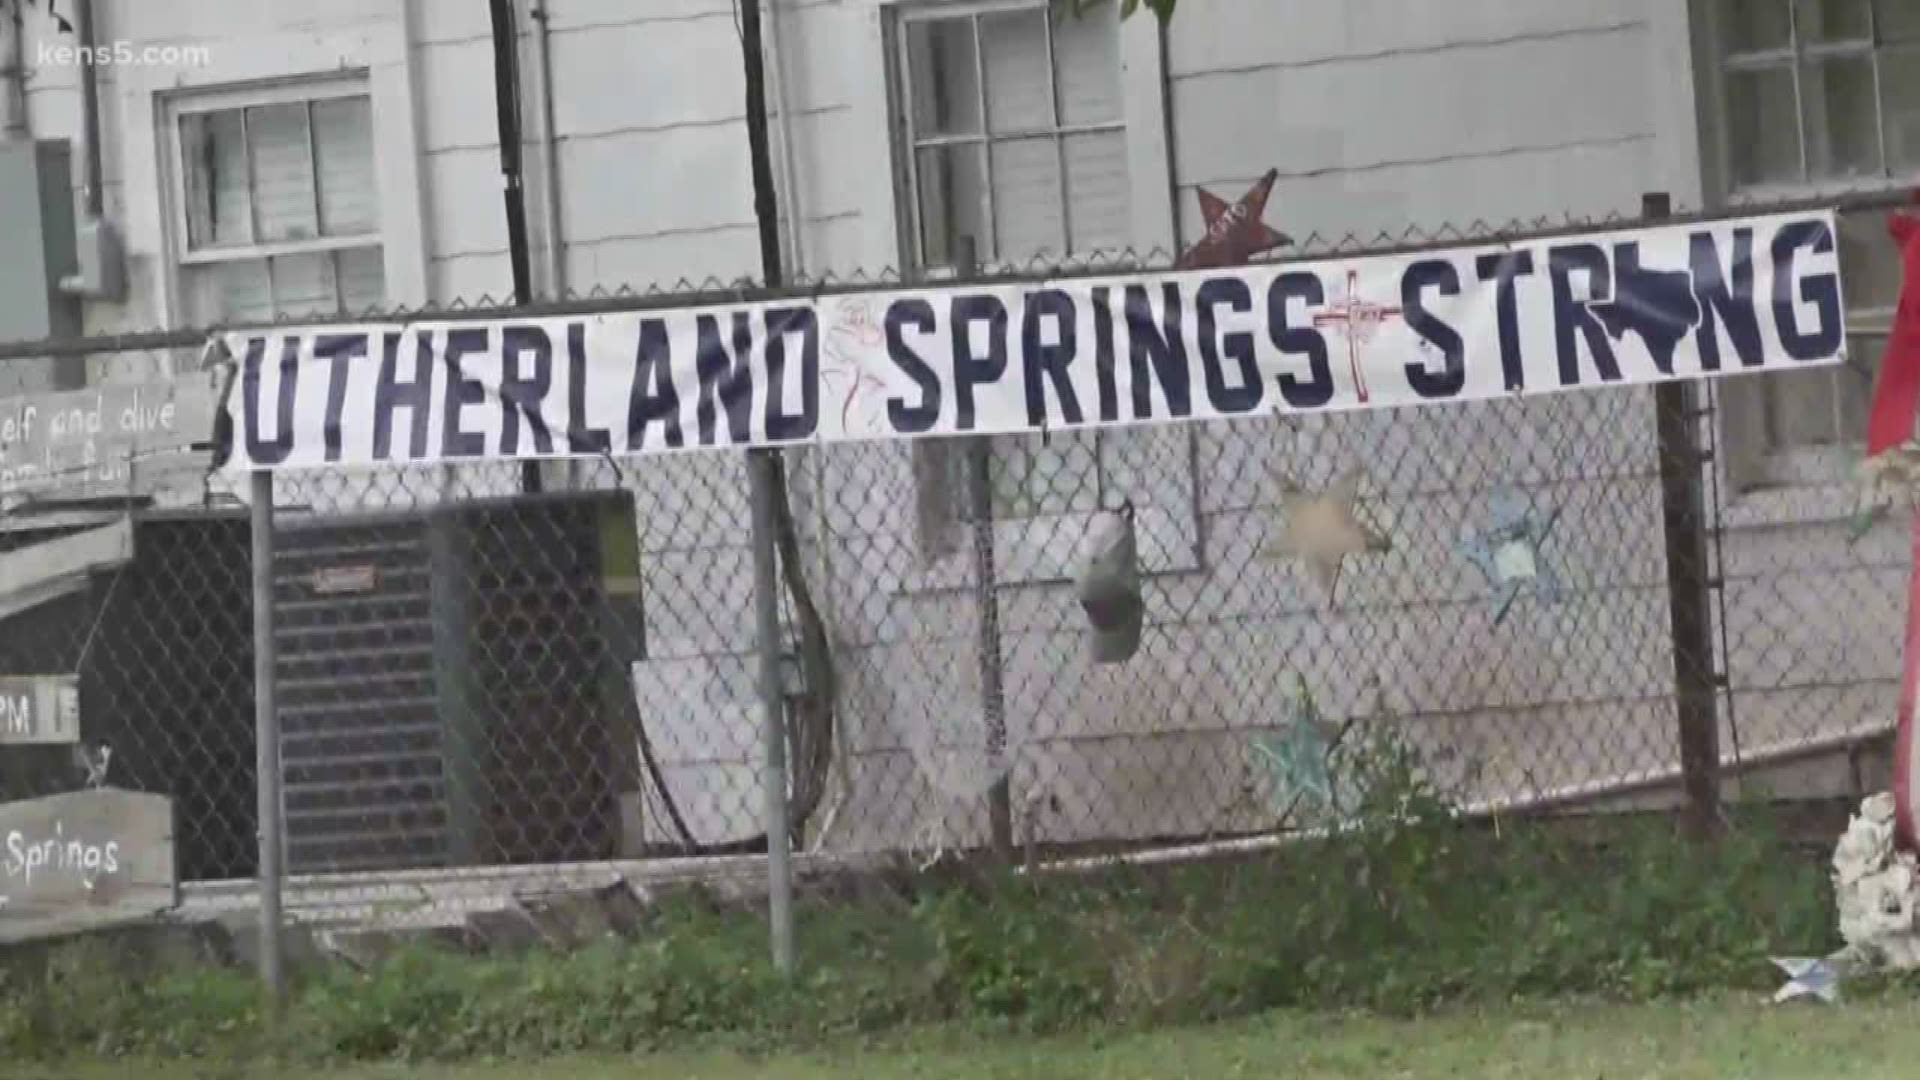 One year ago today, 26 people were killed at First Baptist Church in Sutherland Springs, but for some of those involved, the day isn't about mourning.